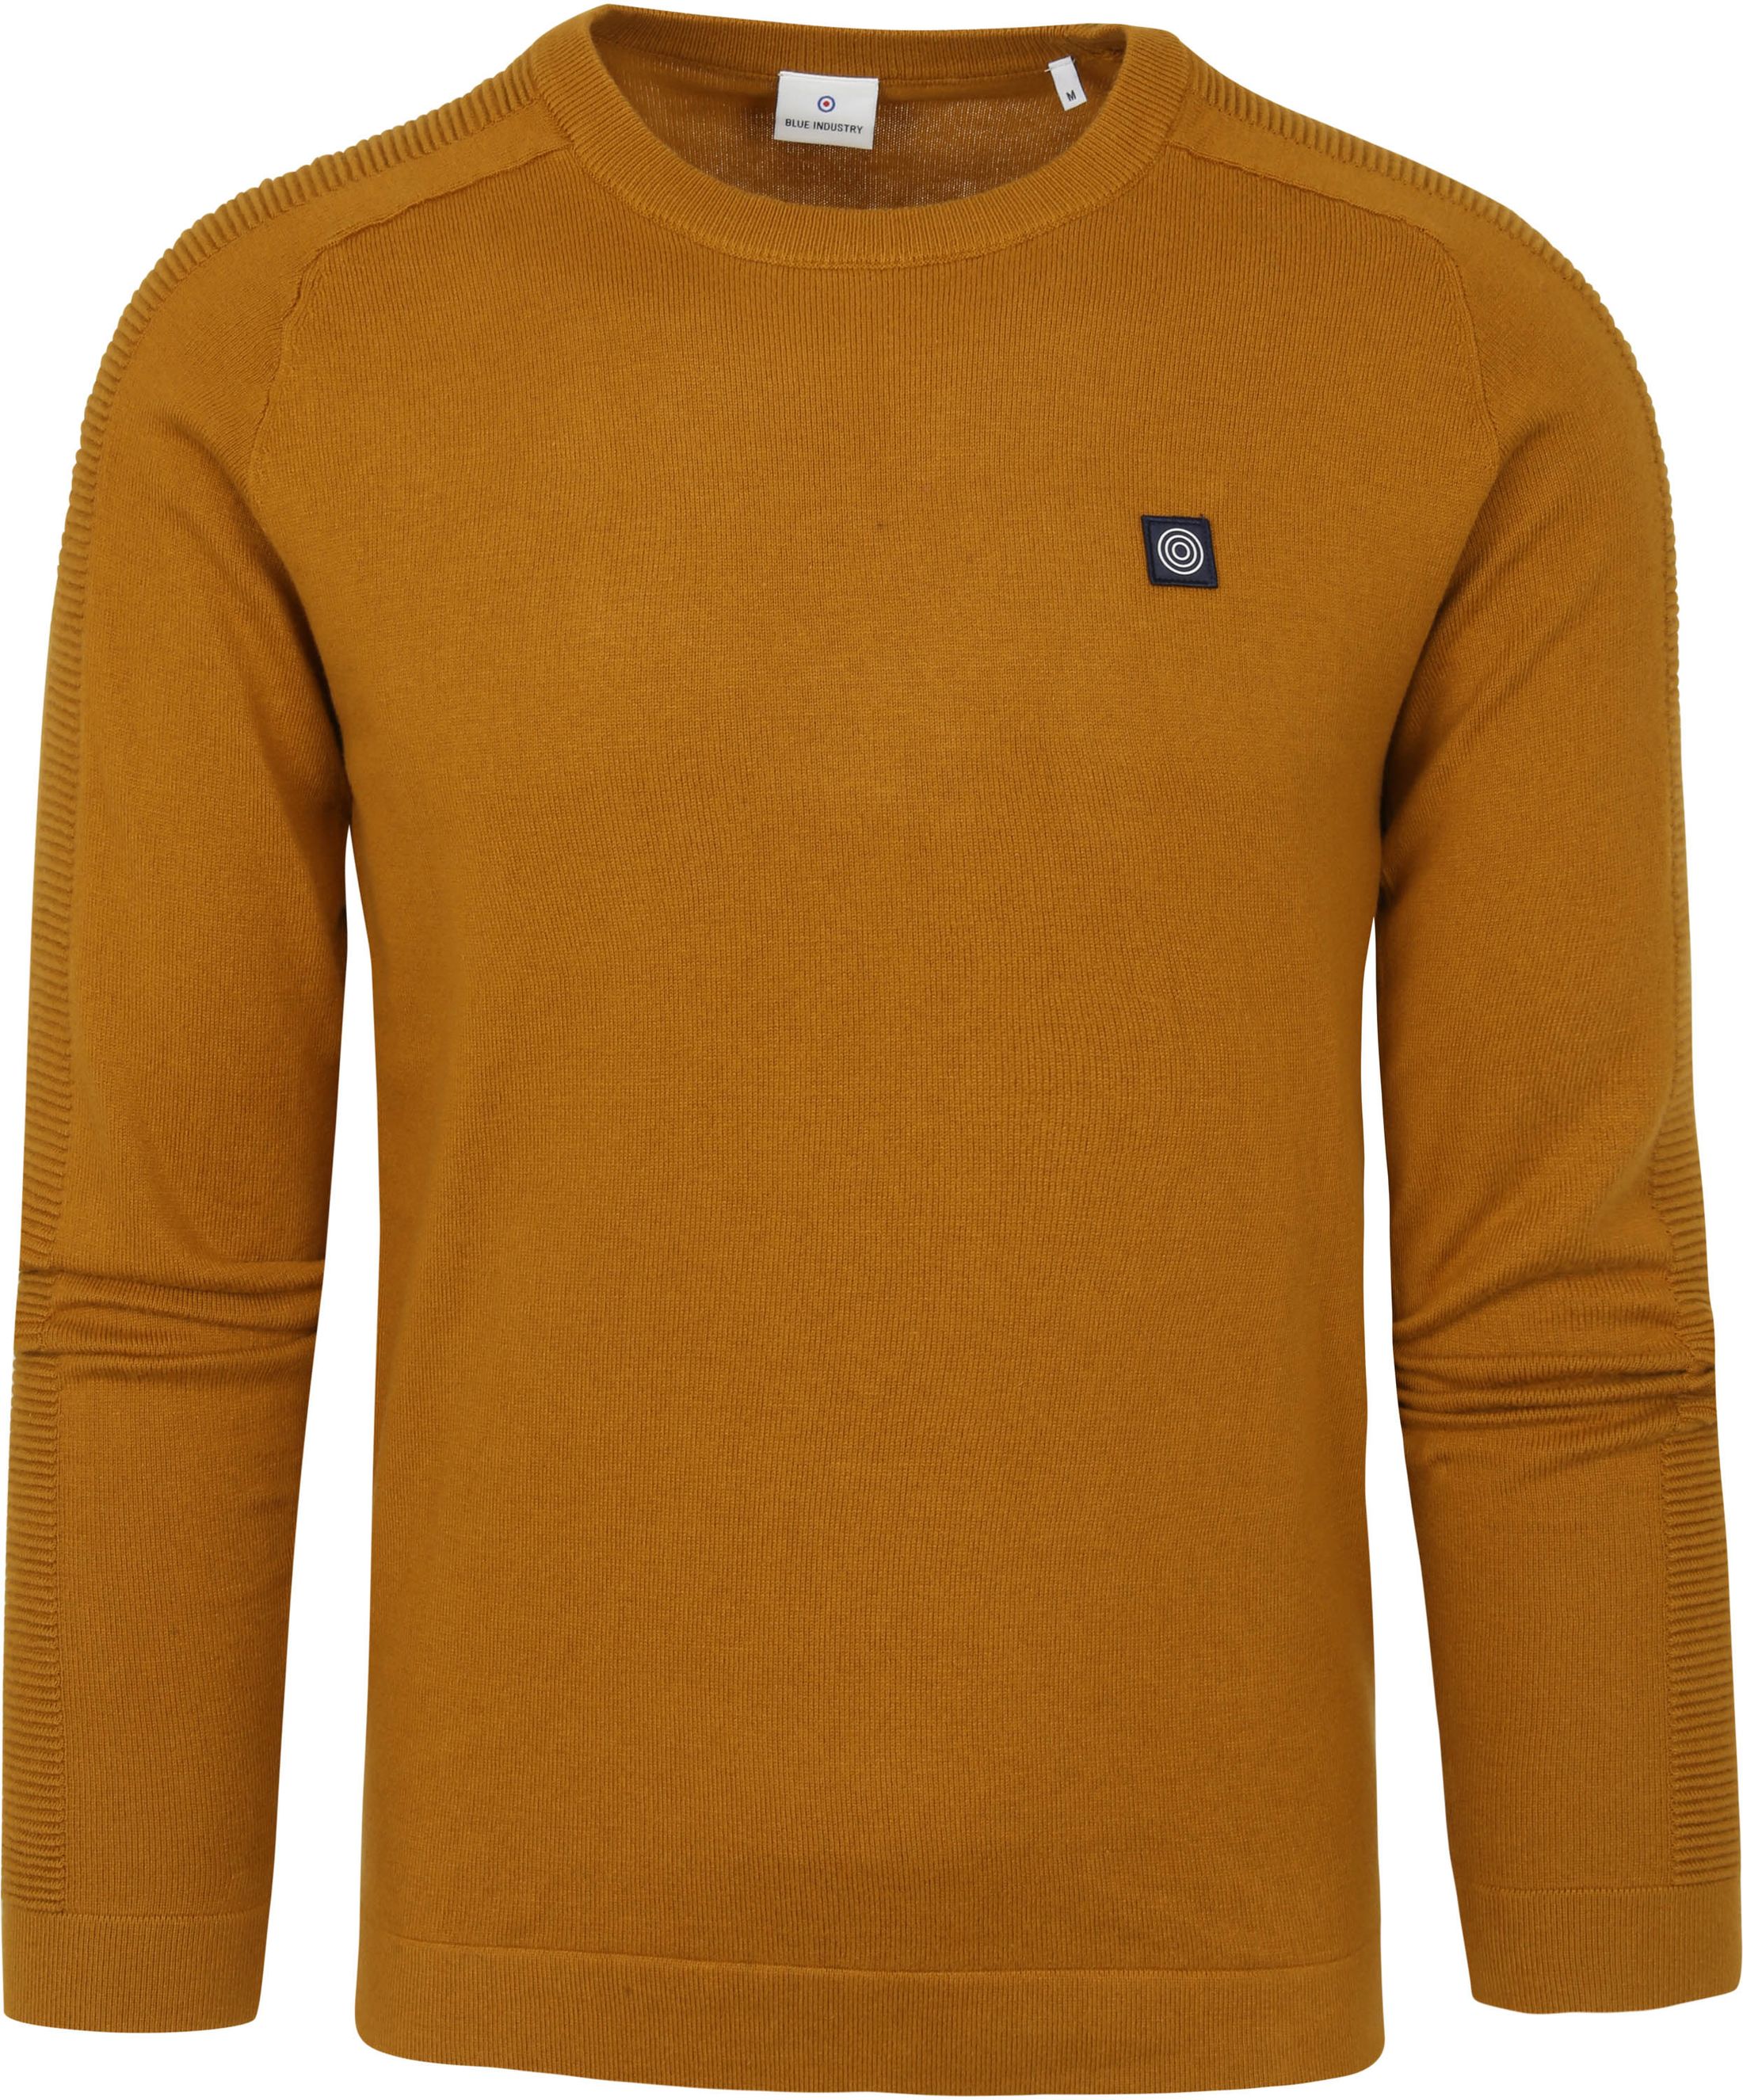 Blue Industry Pullover Ochre Yellow size L